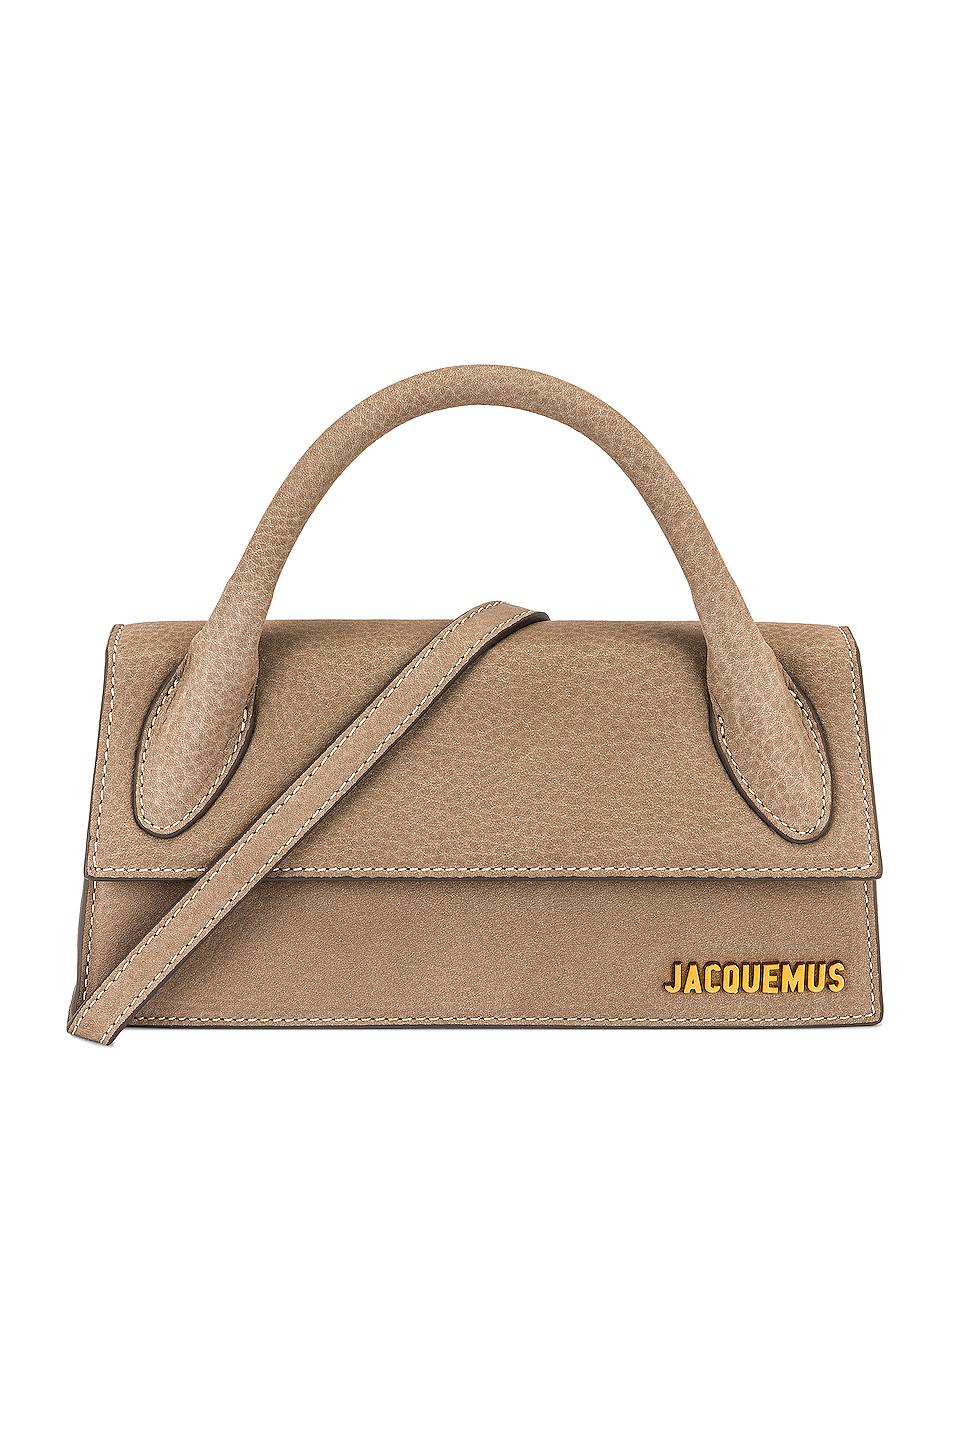 Jacquemus Le Chiquito Long Suede Top Handle Bag in Grey (Gray) | Lyst